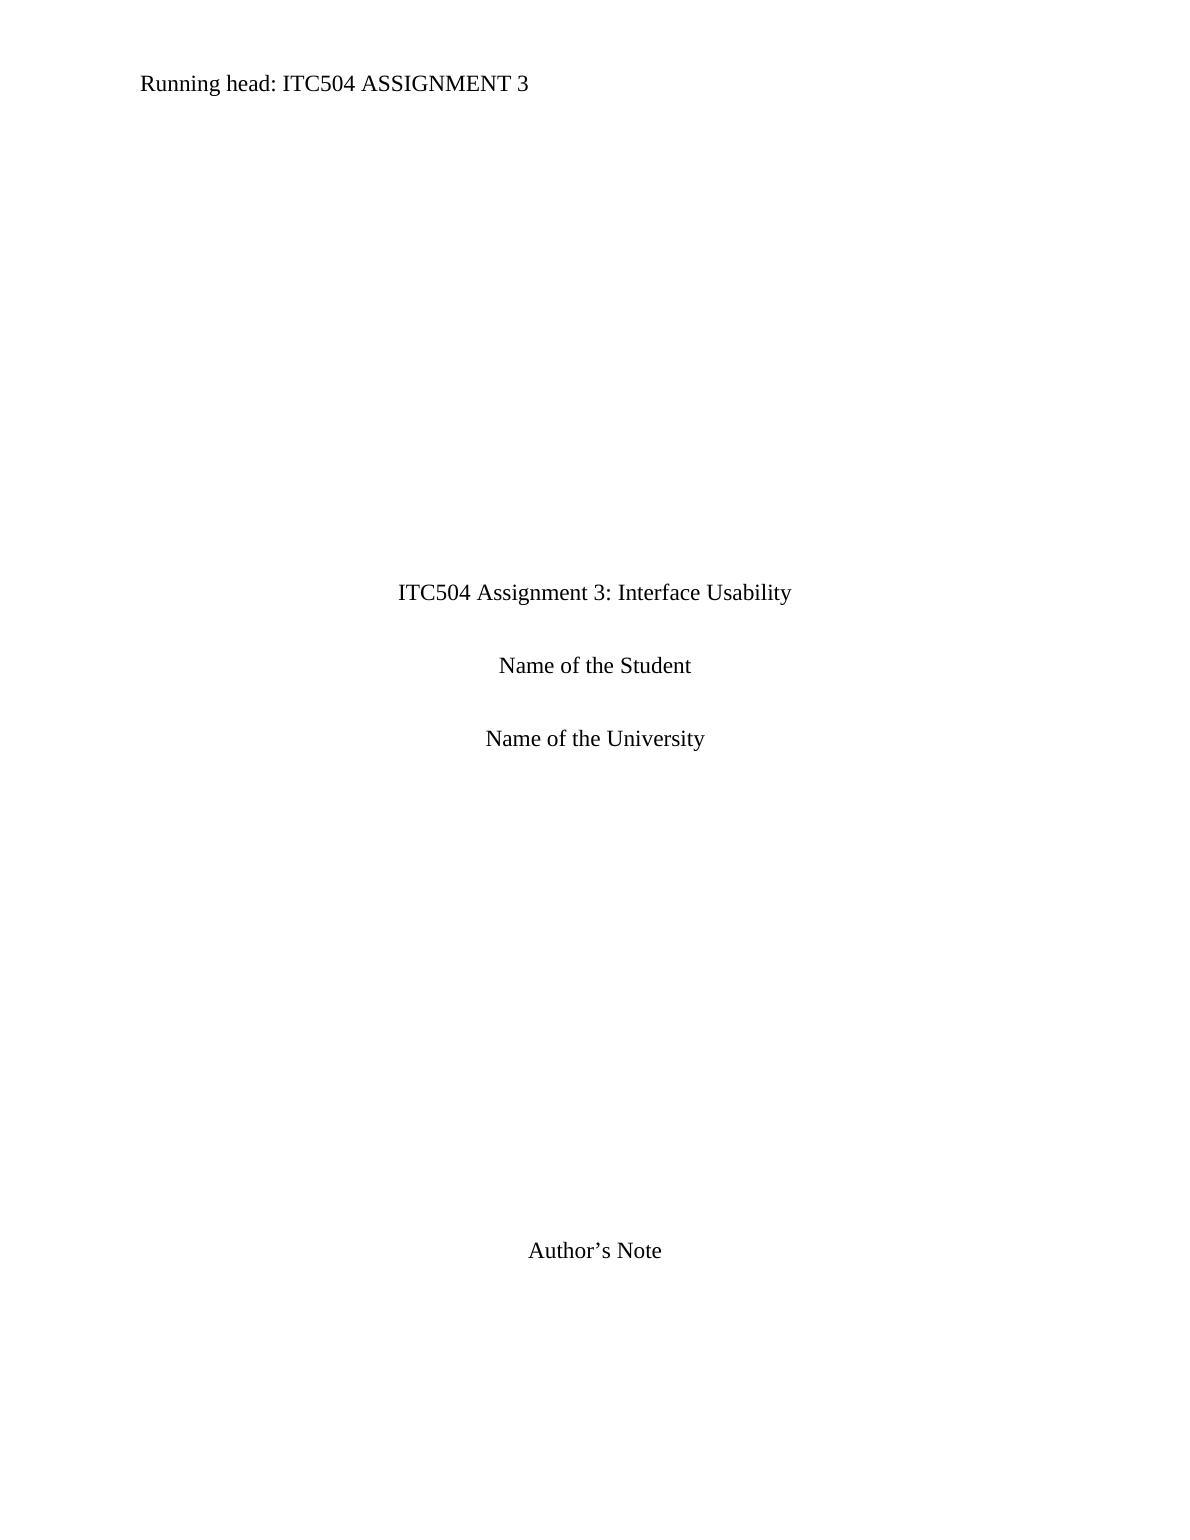 Design Overview of ITC504 User Interface Usability and Performance_1